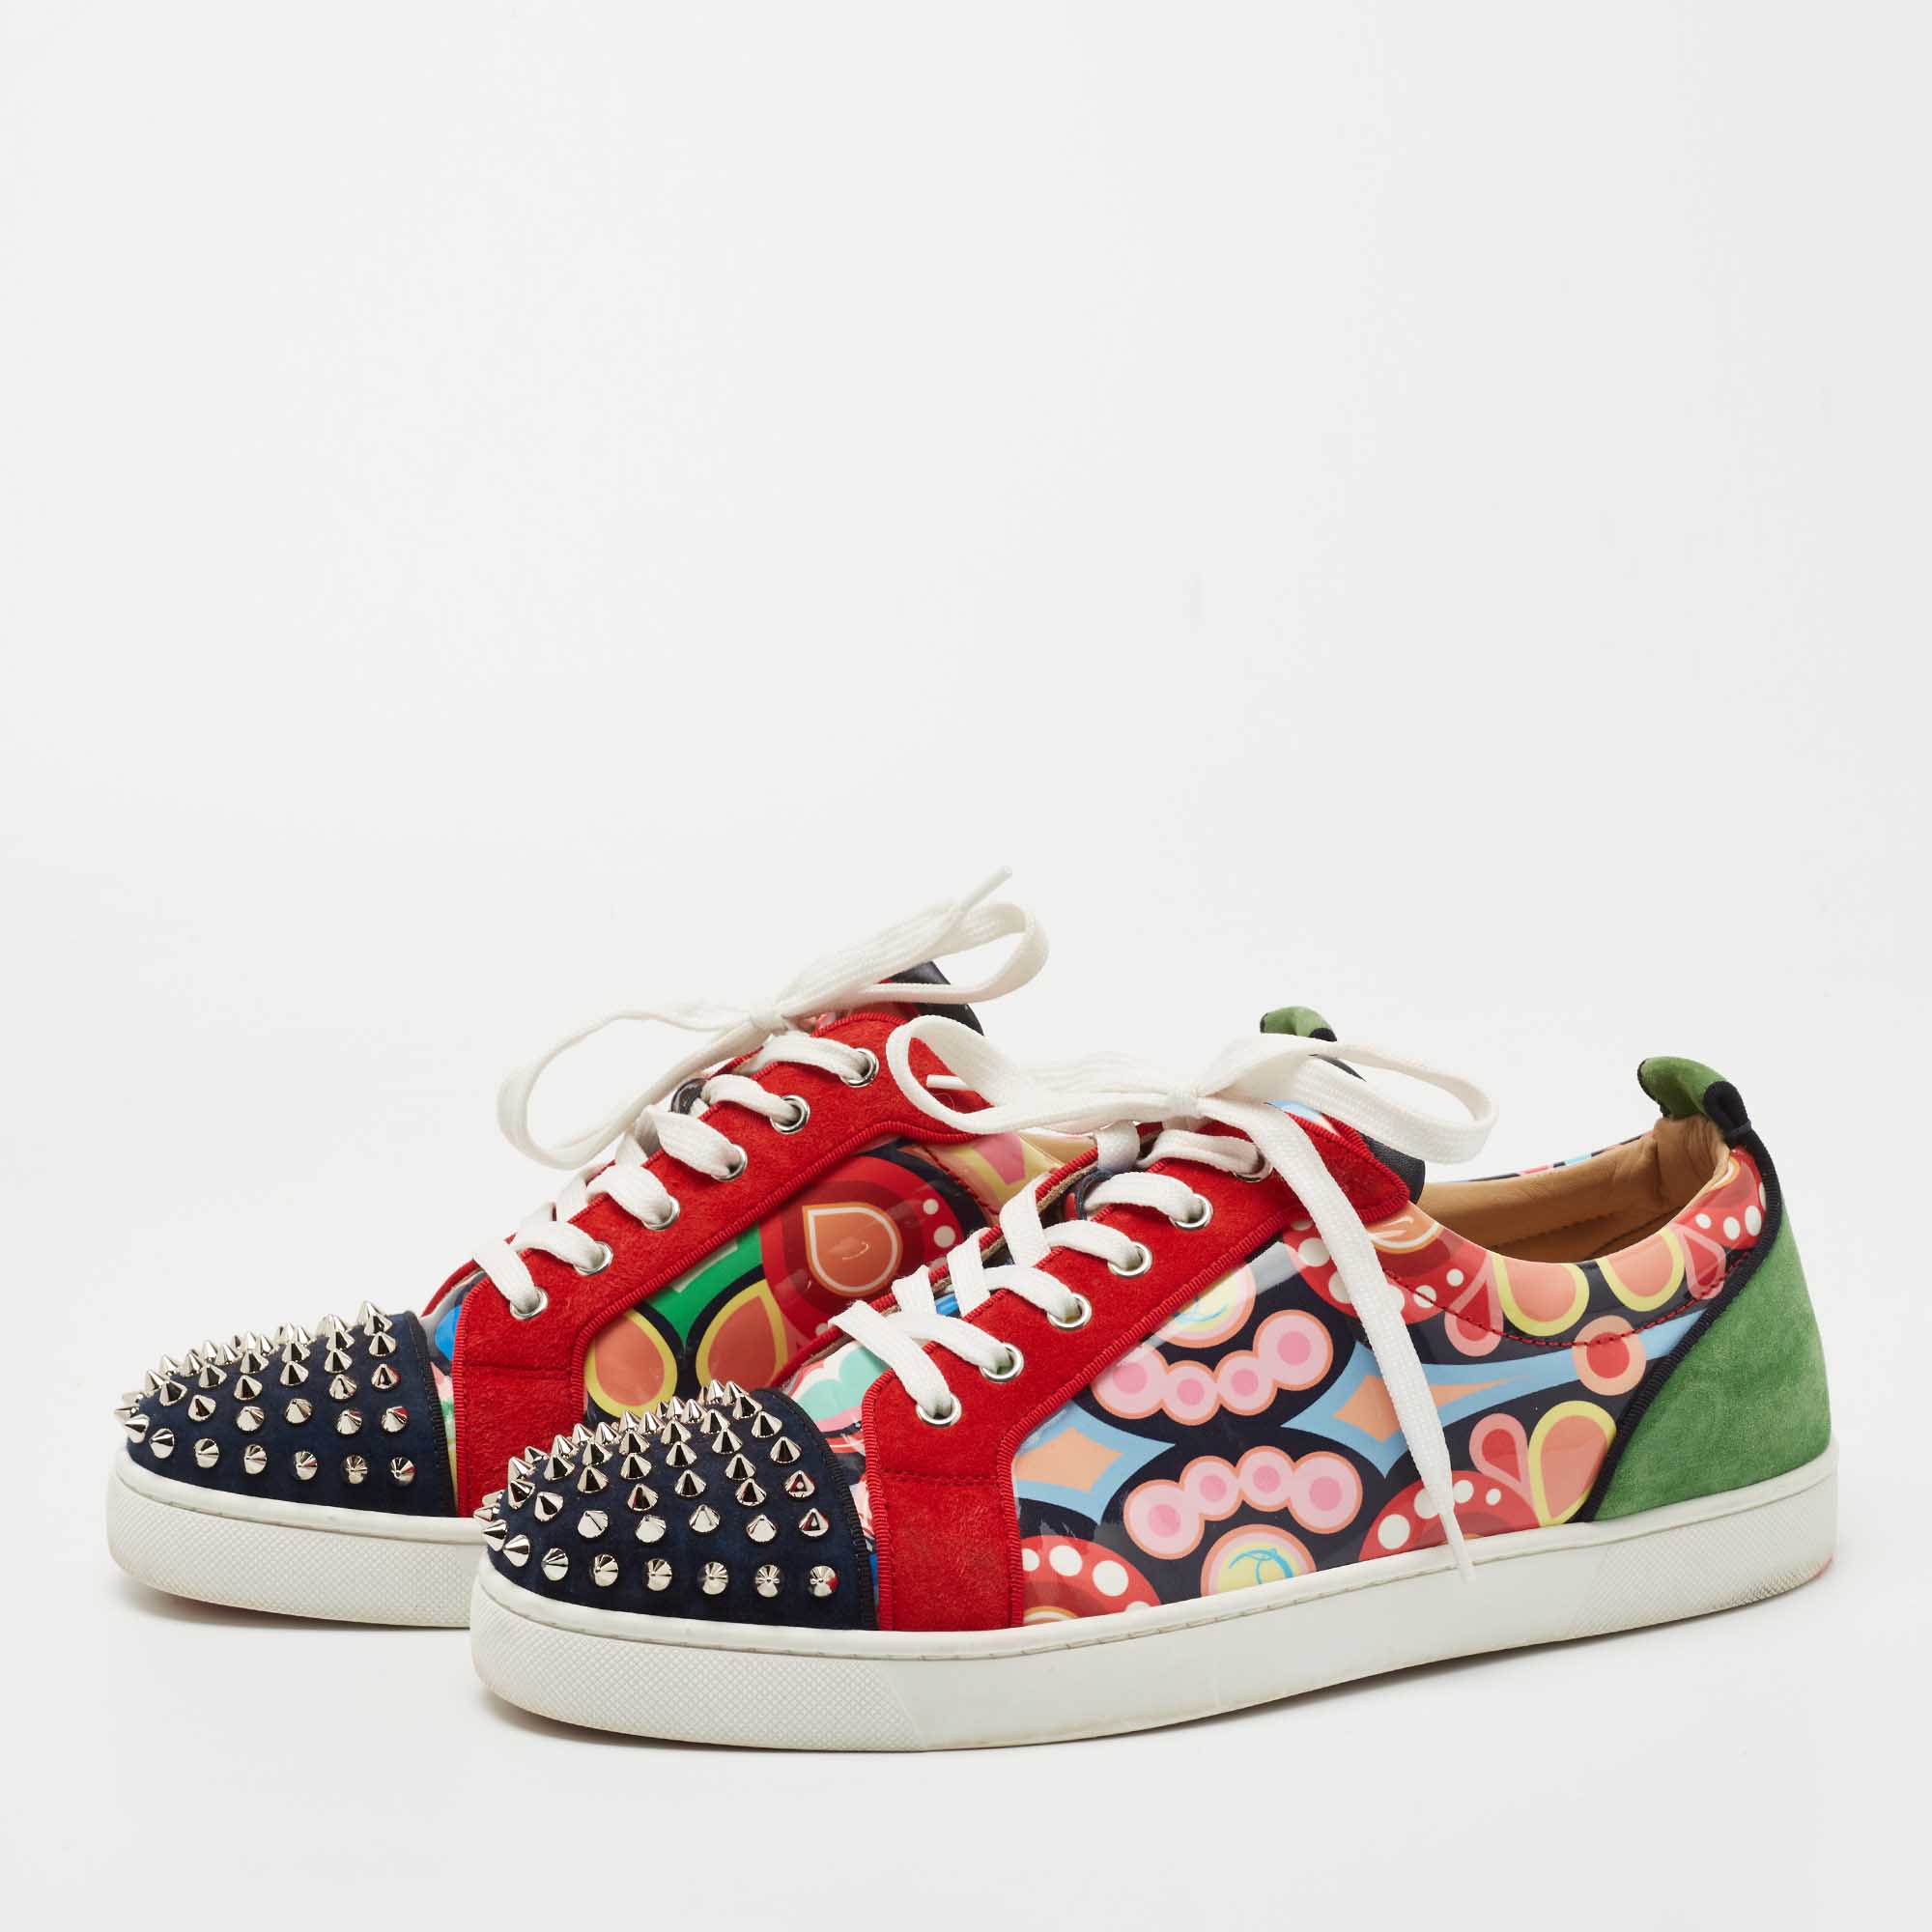 

Christian Louboutin Multicolor Printed Patent Leather and Suede Louis Junior Spike Low Top Sneakers Size